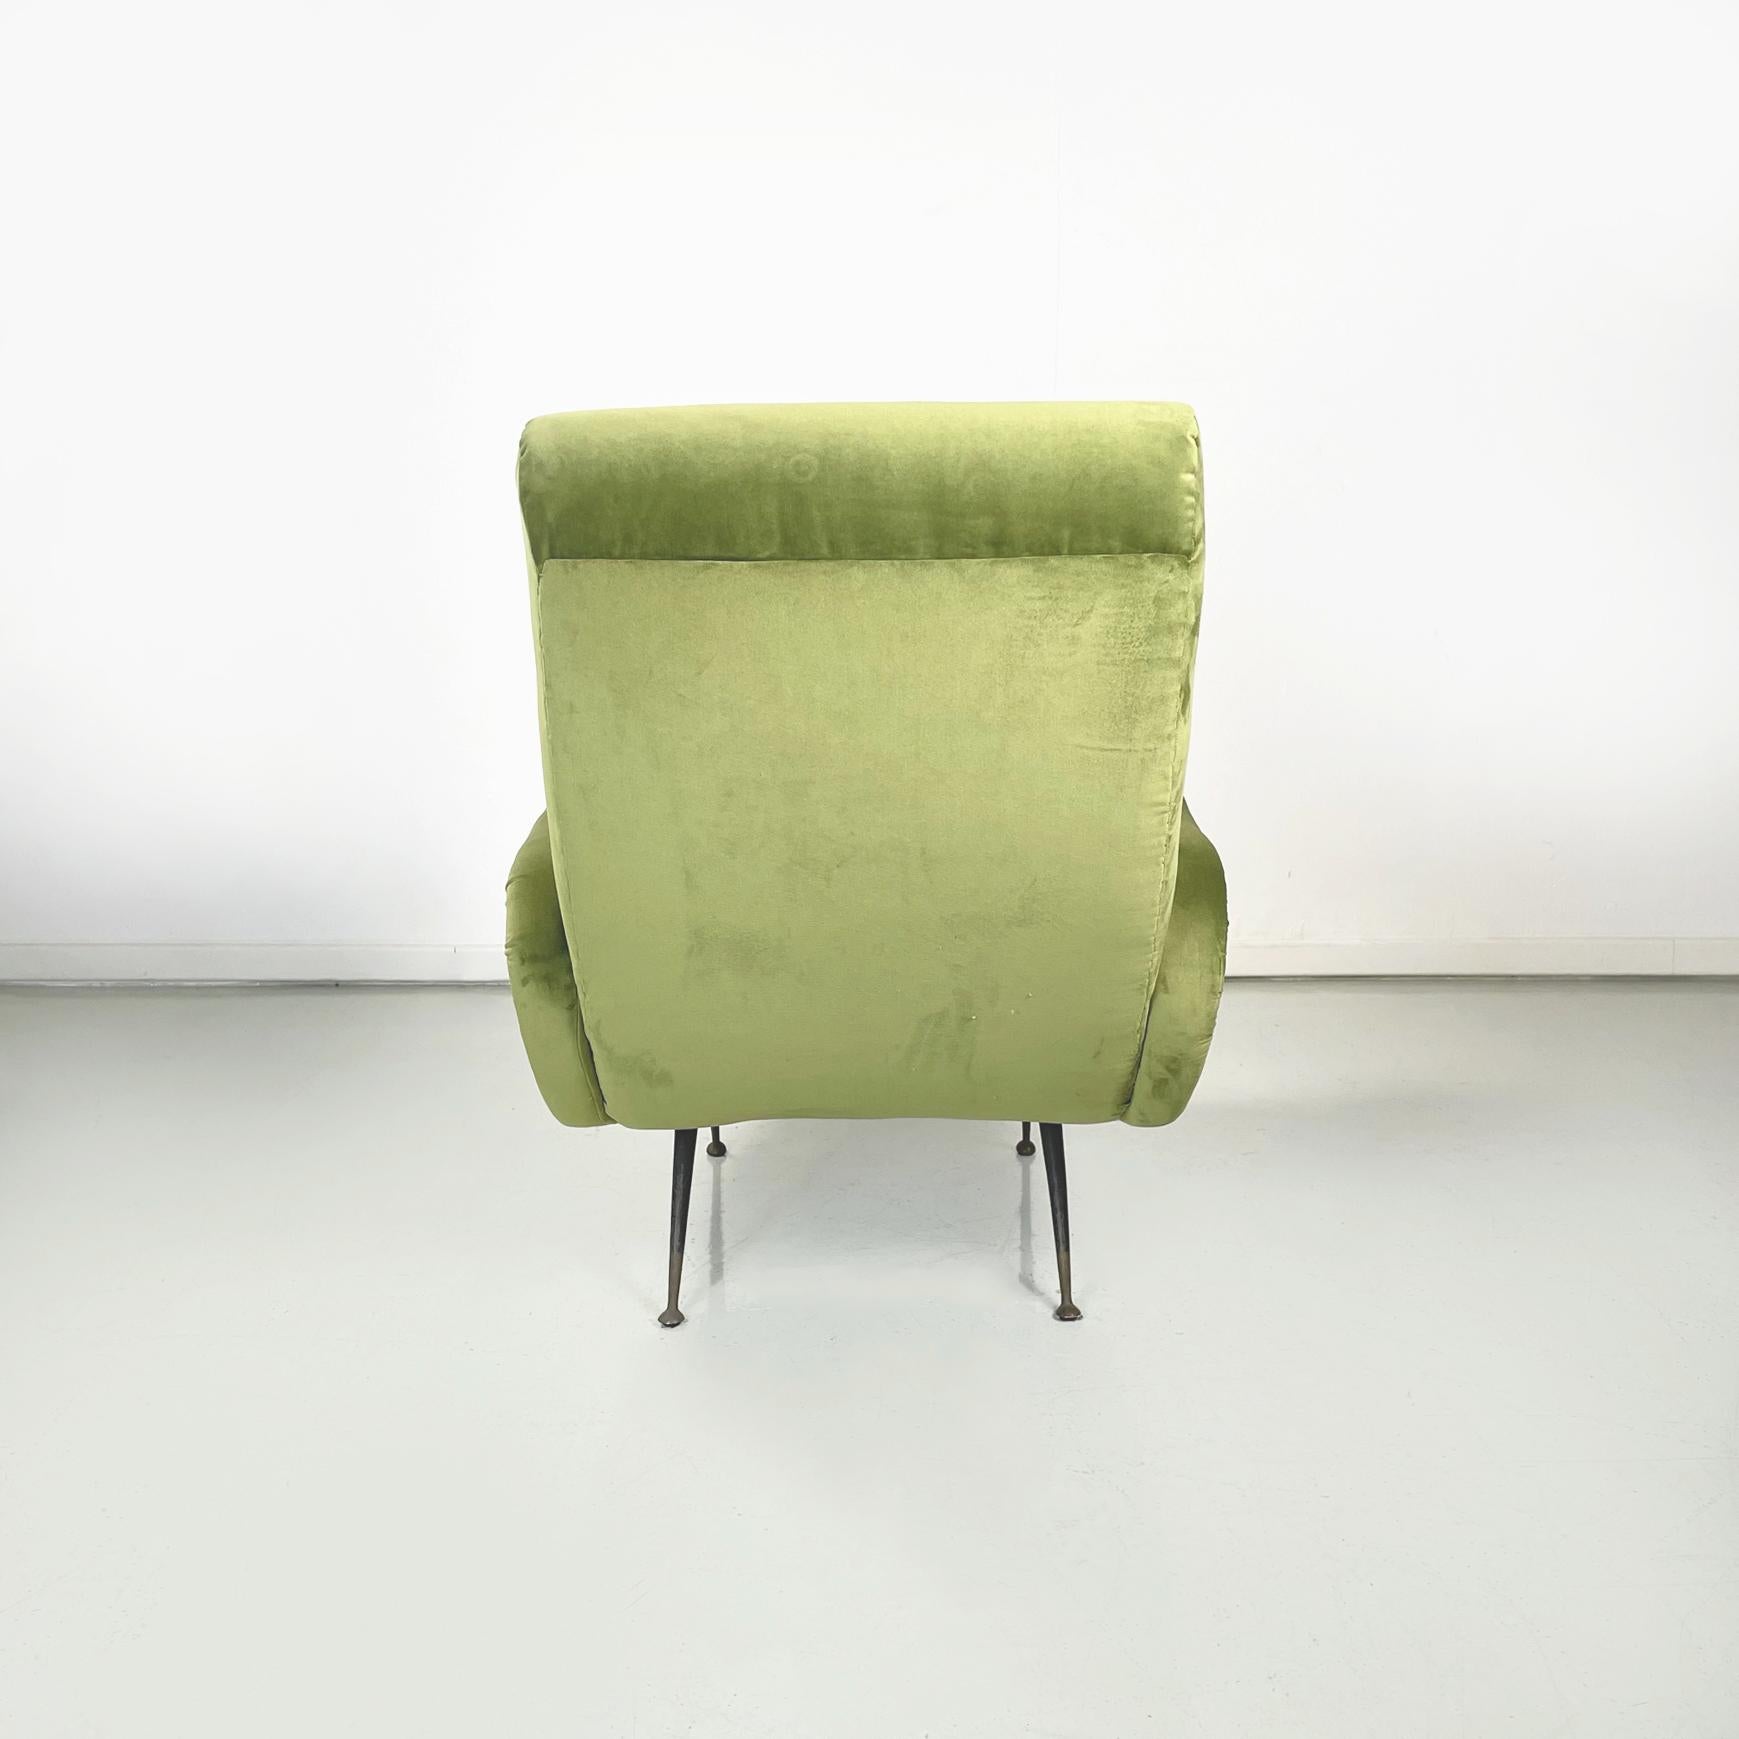 Italian Midcentury Green Velvet and Black Metal Armchairs in Lady Style, 1950s For Sale 1